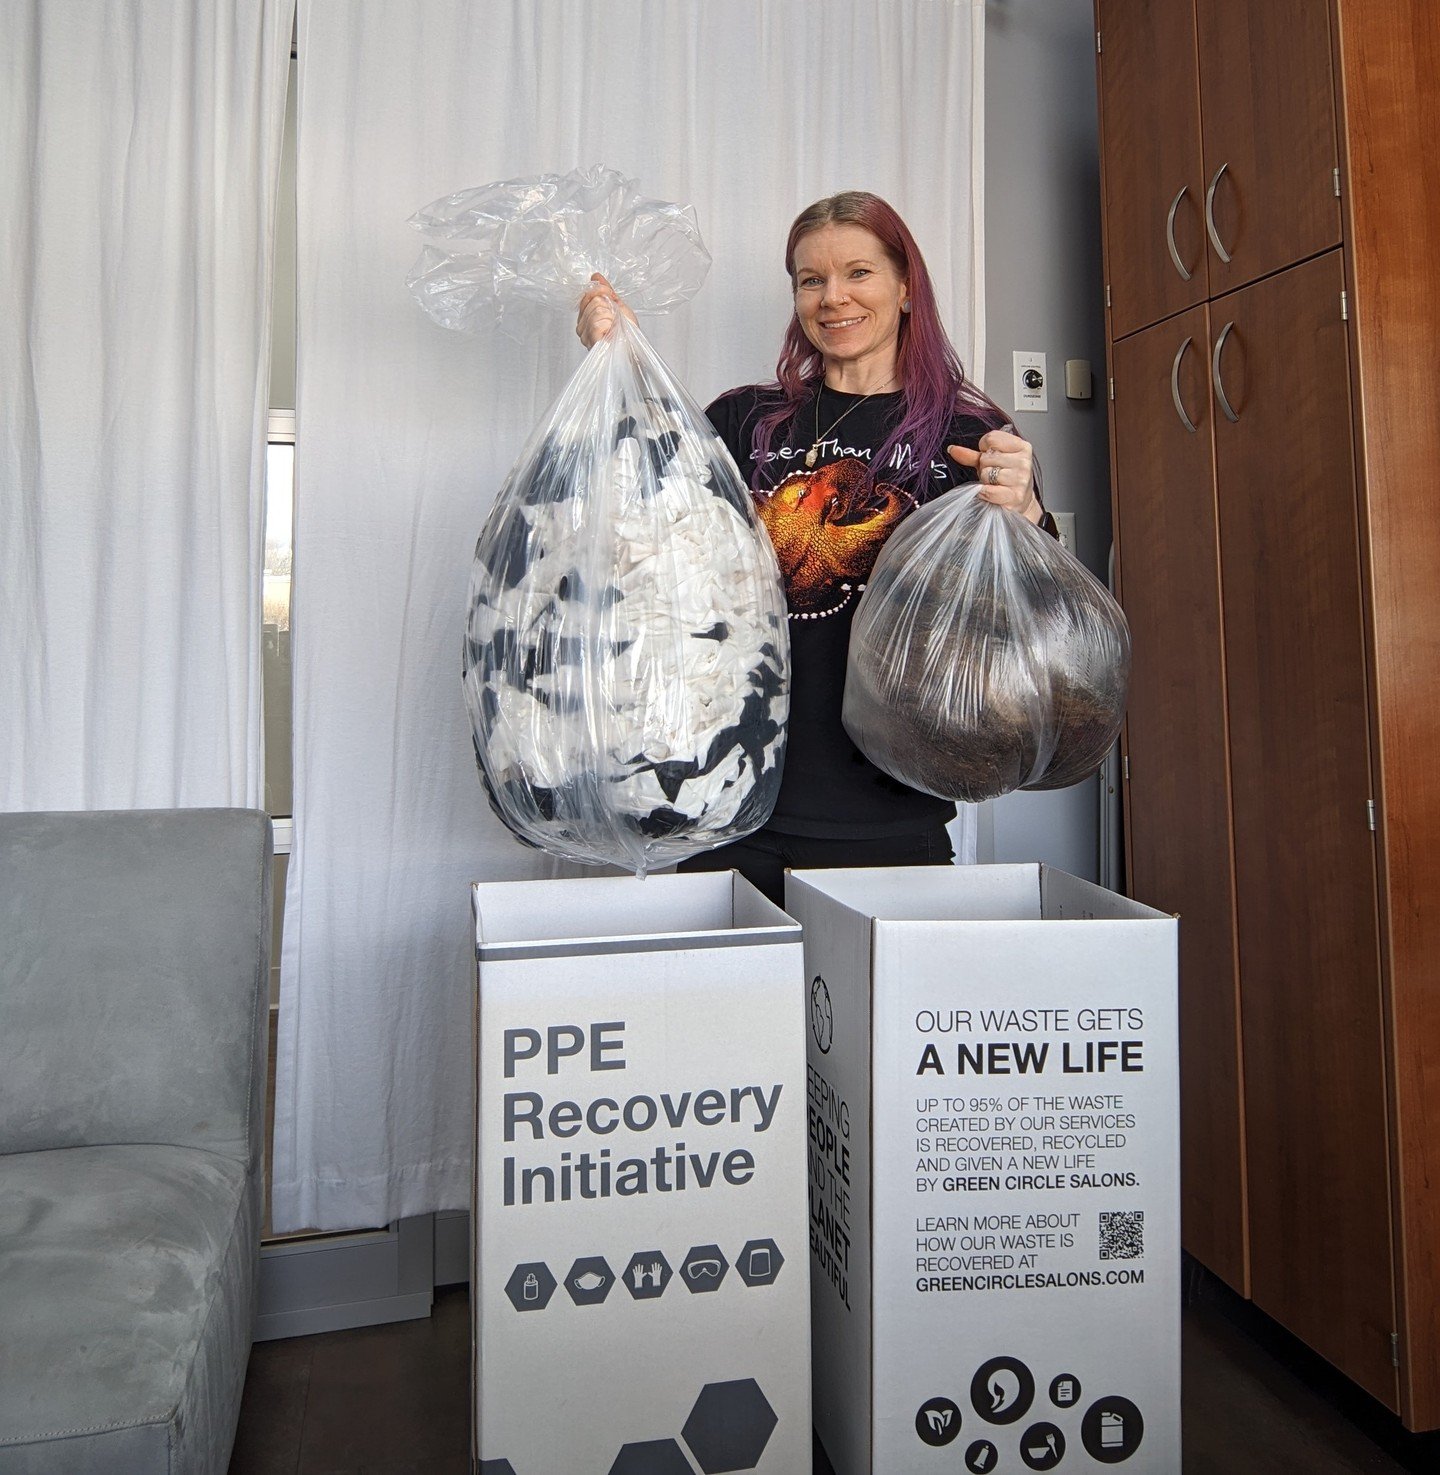 Happy Earth Day! Through our partnership with @greencirclesalons, we recycle &amp; repurpose salon waste, ensuring every visit leaves a positive impact on the planet.

#sustainablesalon #sustainablesalons #sustainablehairsalon #greencirclesalons #gre